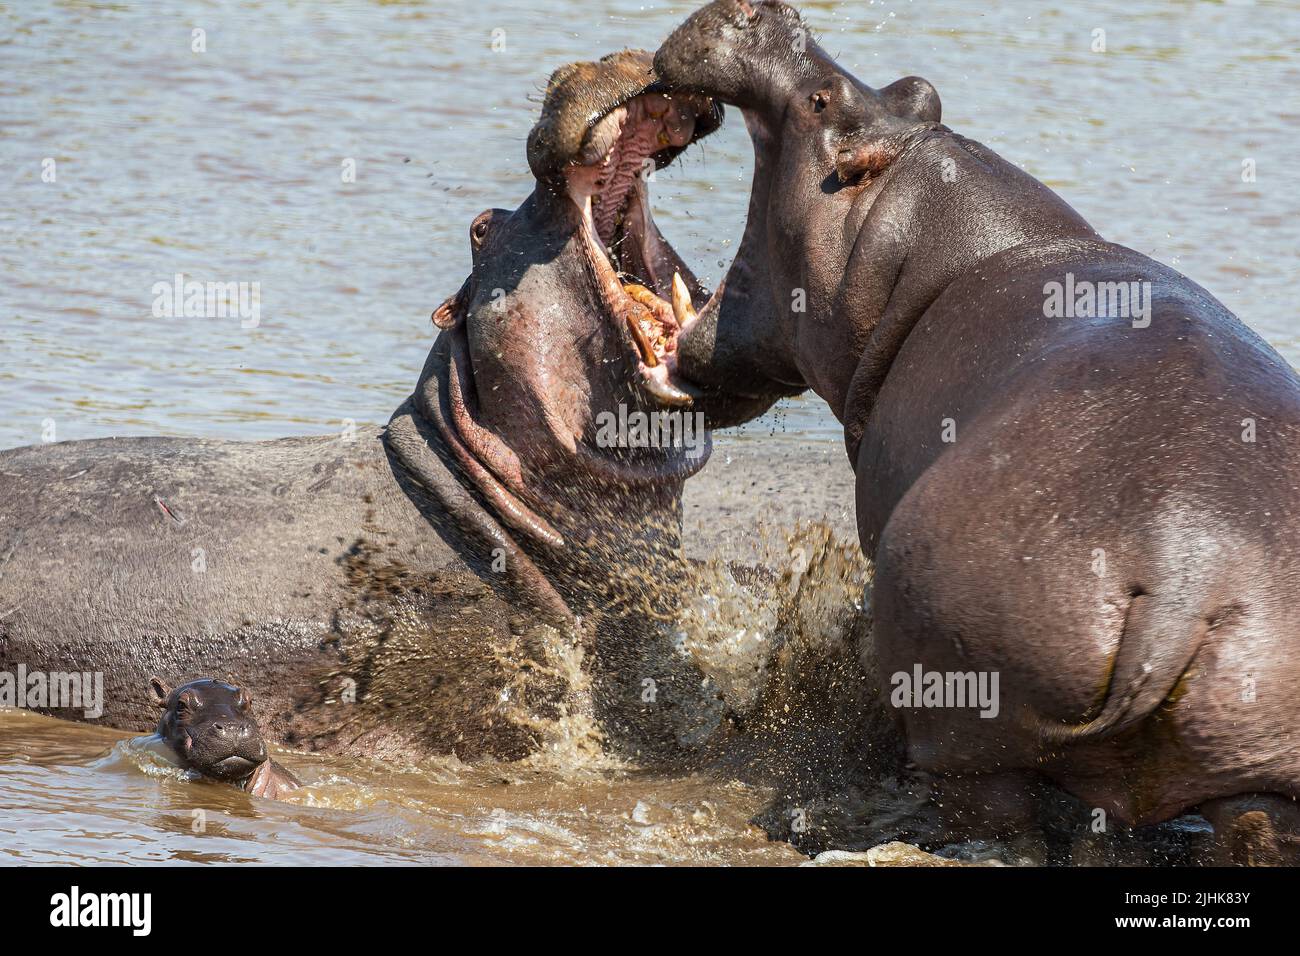 The most vicious moment of the sparring session as they lock jaws. KENYA, AFRICA. Angry Hippo Momma  By Aimee Braniff Cree   **EXCLUSIVE**   POWERFUL Stock Photo